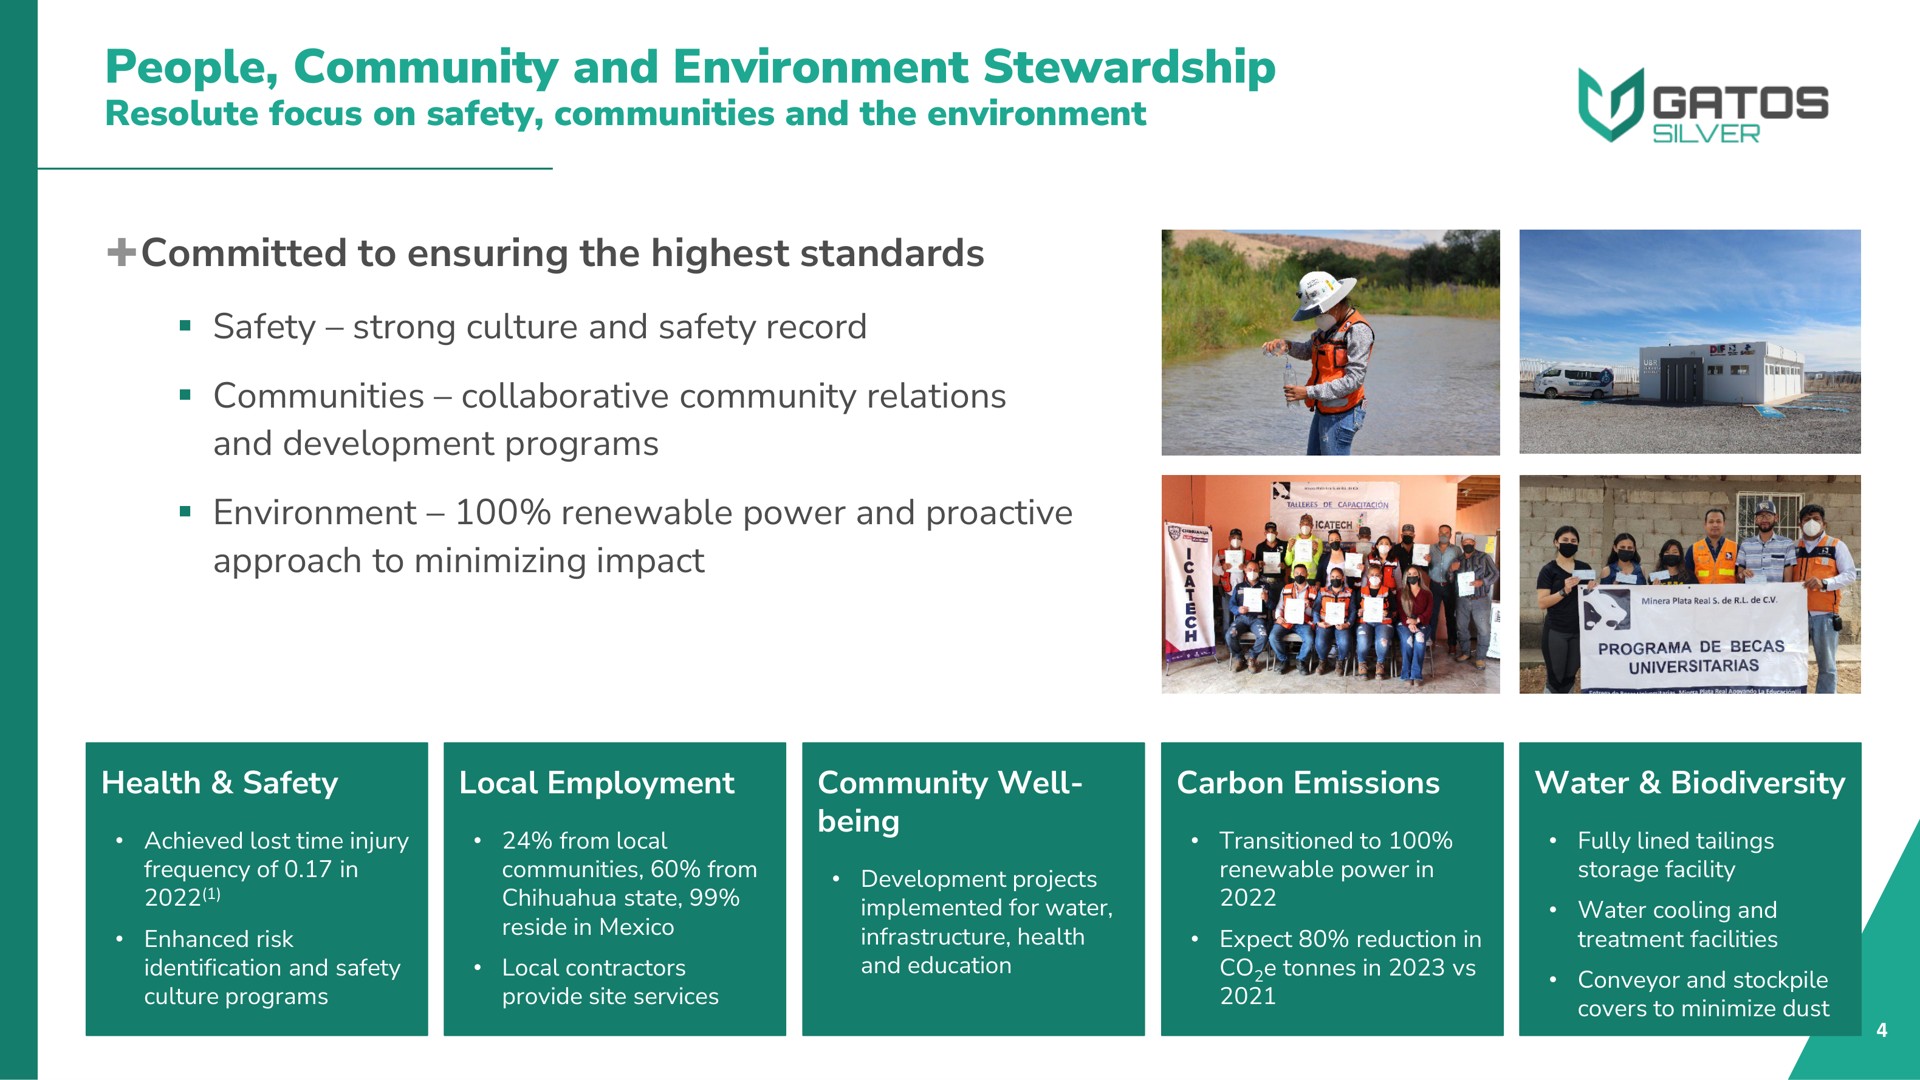 people community and environment stewardship resolute focus on safety communities and the environment committed to ensuring the highest standards safety strong culture and safety record communities collaborative community relations and development programs environment renewable power and approach to minimizing impact | Gatos Silver